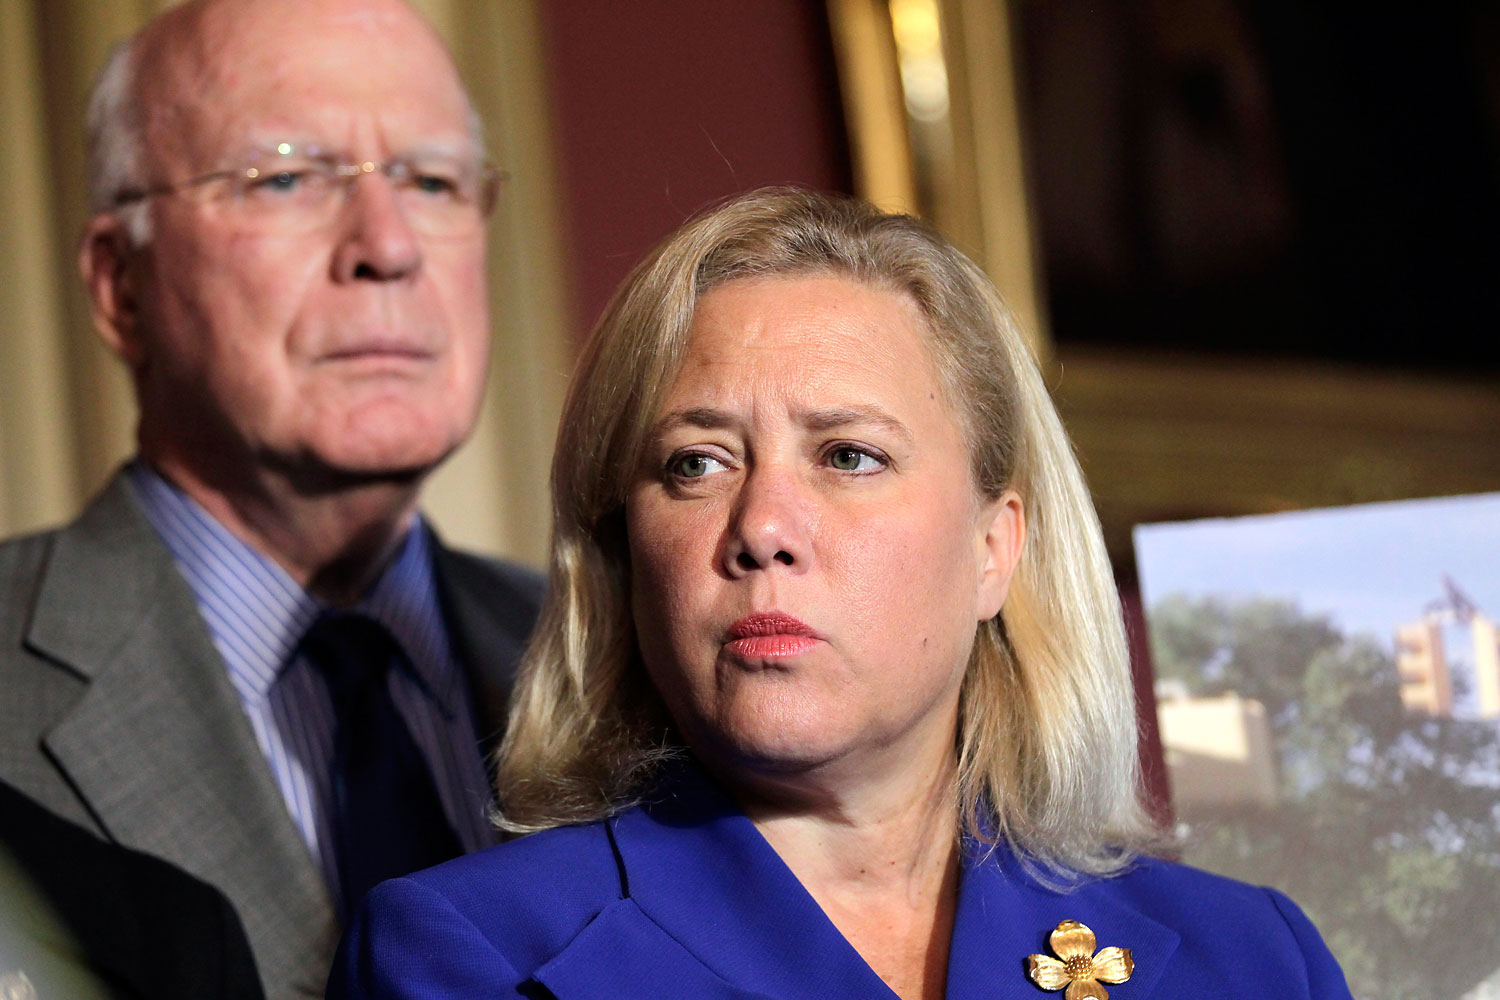 Sen. Mary Landrieu, D-La., right, joined by Sen. Patrick Leahy, D-Vt., left, urges funding for the Federal Emergency Management Agency as the agency is on track to run out of disaster relief funds after responding to a spate of natural disasters this year, most recently Hurricane Irene and Tropical Storm Lee, at the Capitol in Washington, Wednesday, Sept. 14, 2011. (J. Scott Applewhite—AP)